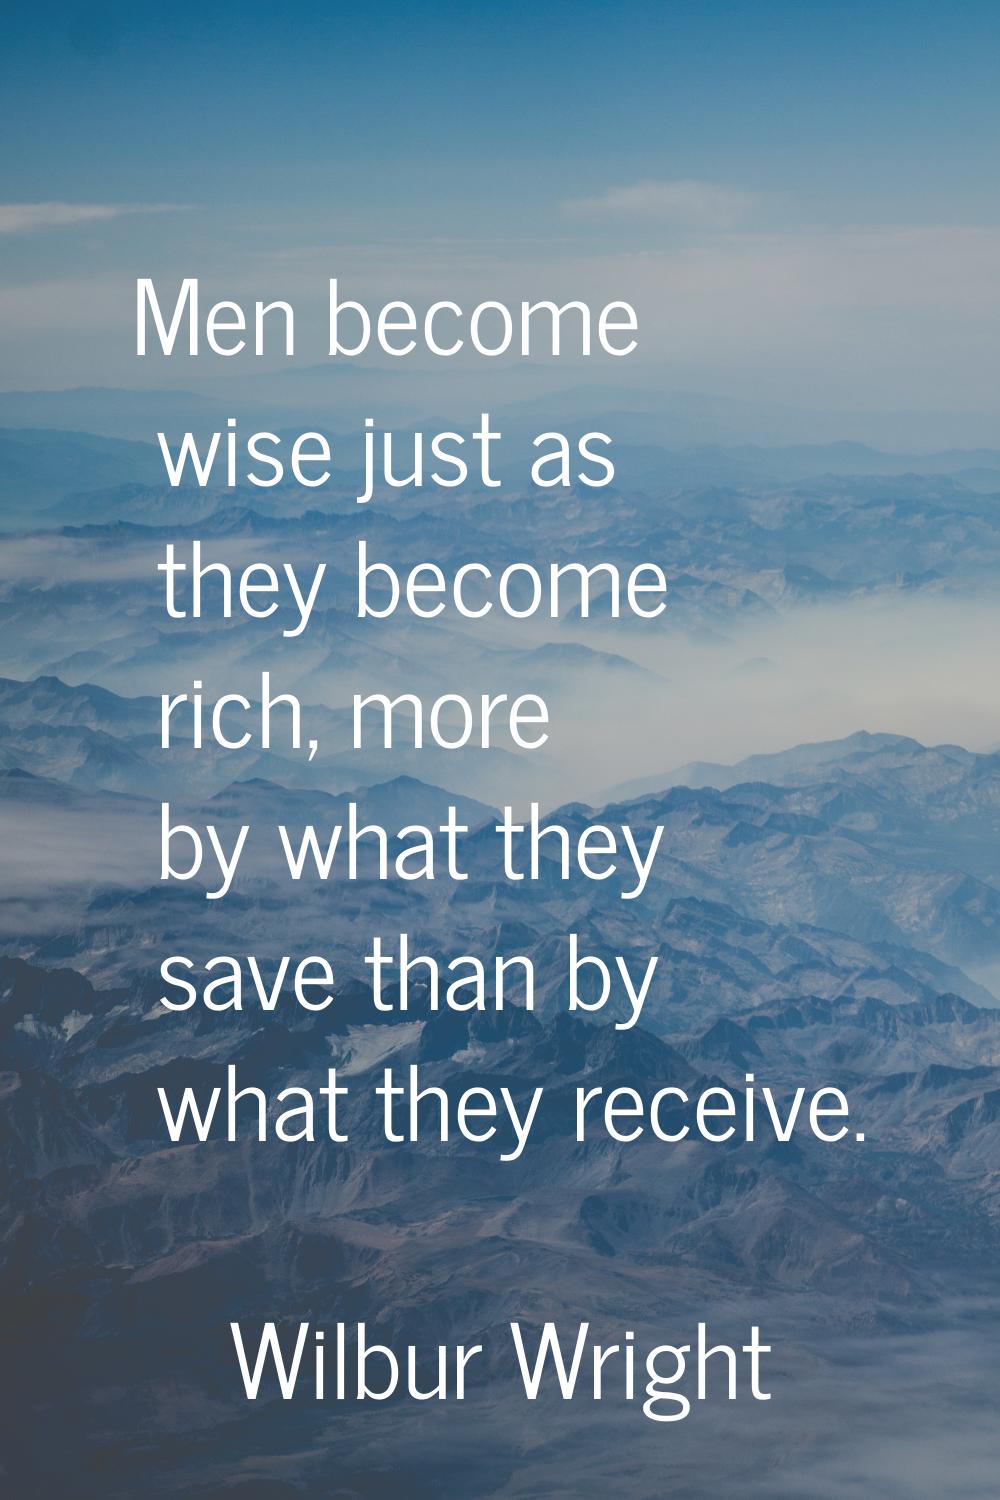 Men become wise just as they become rich, more by what they save than by what they receive.